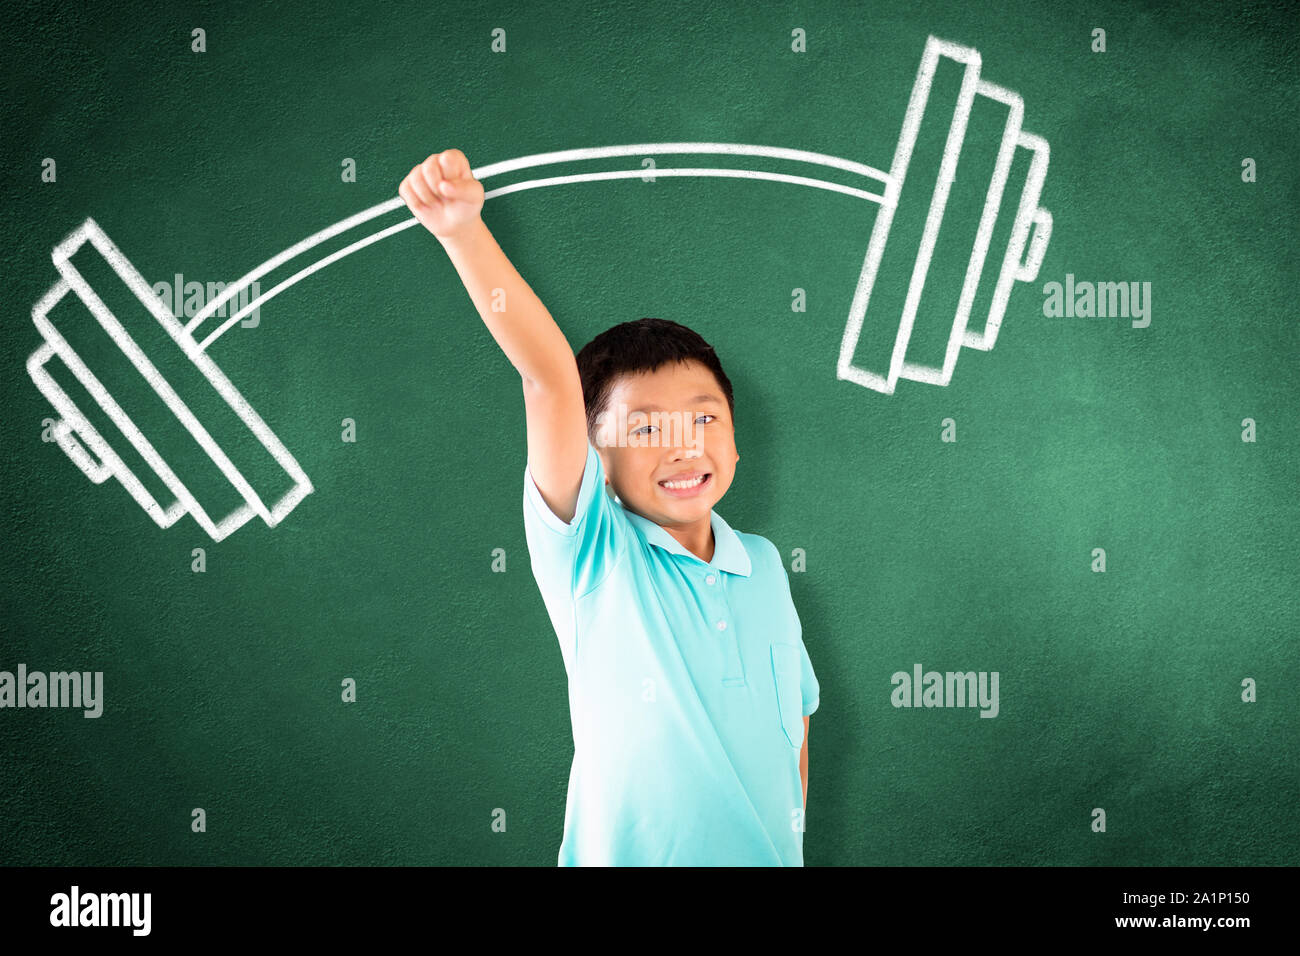 kid standing against chalkboard with strong winner concept Stock Photo